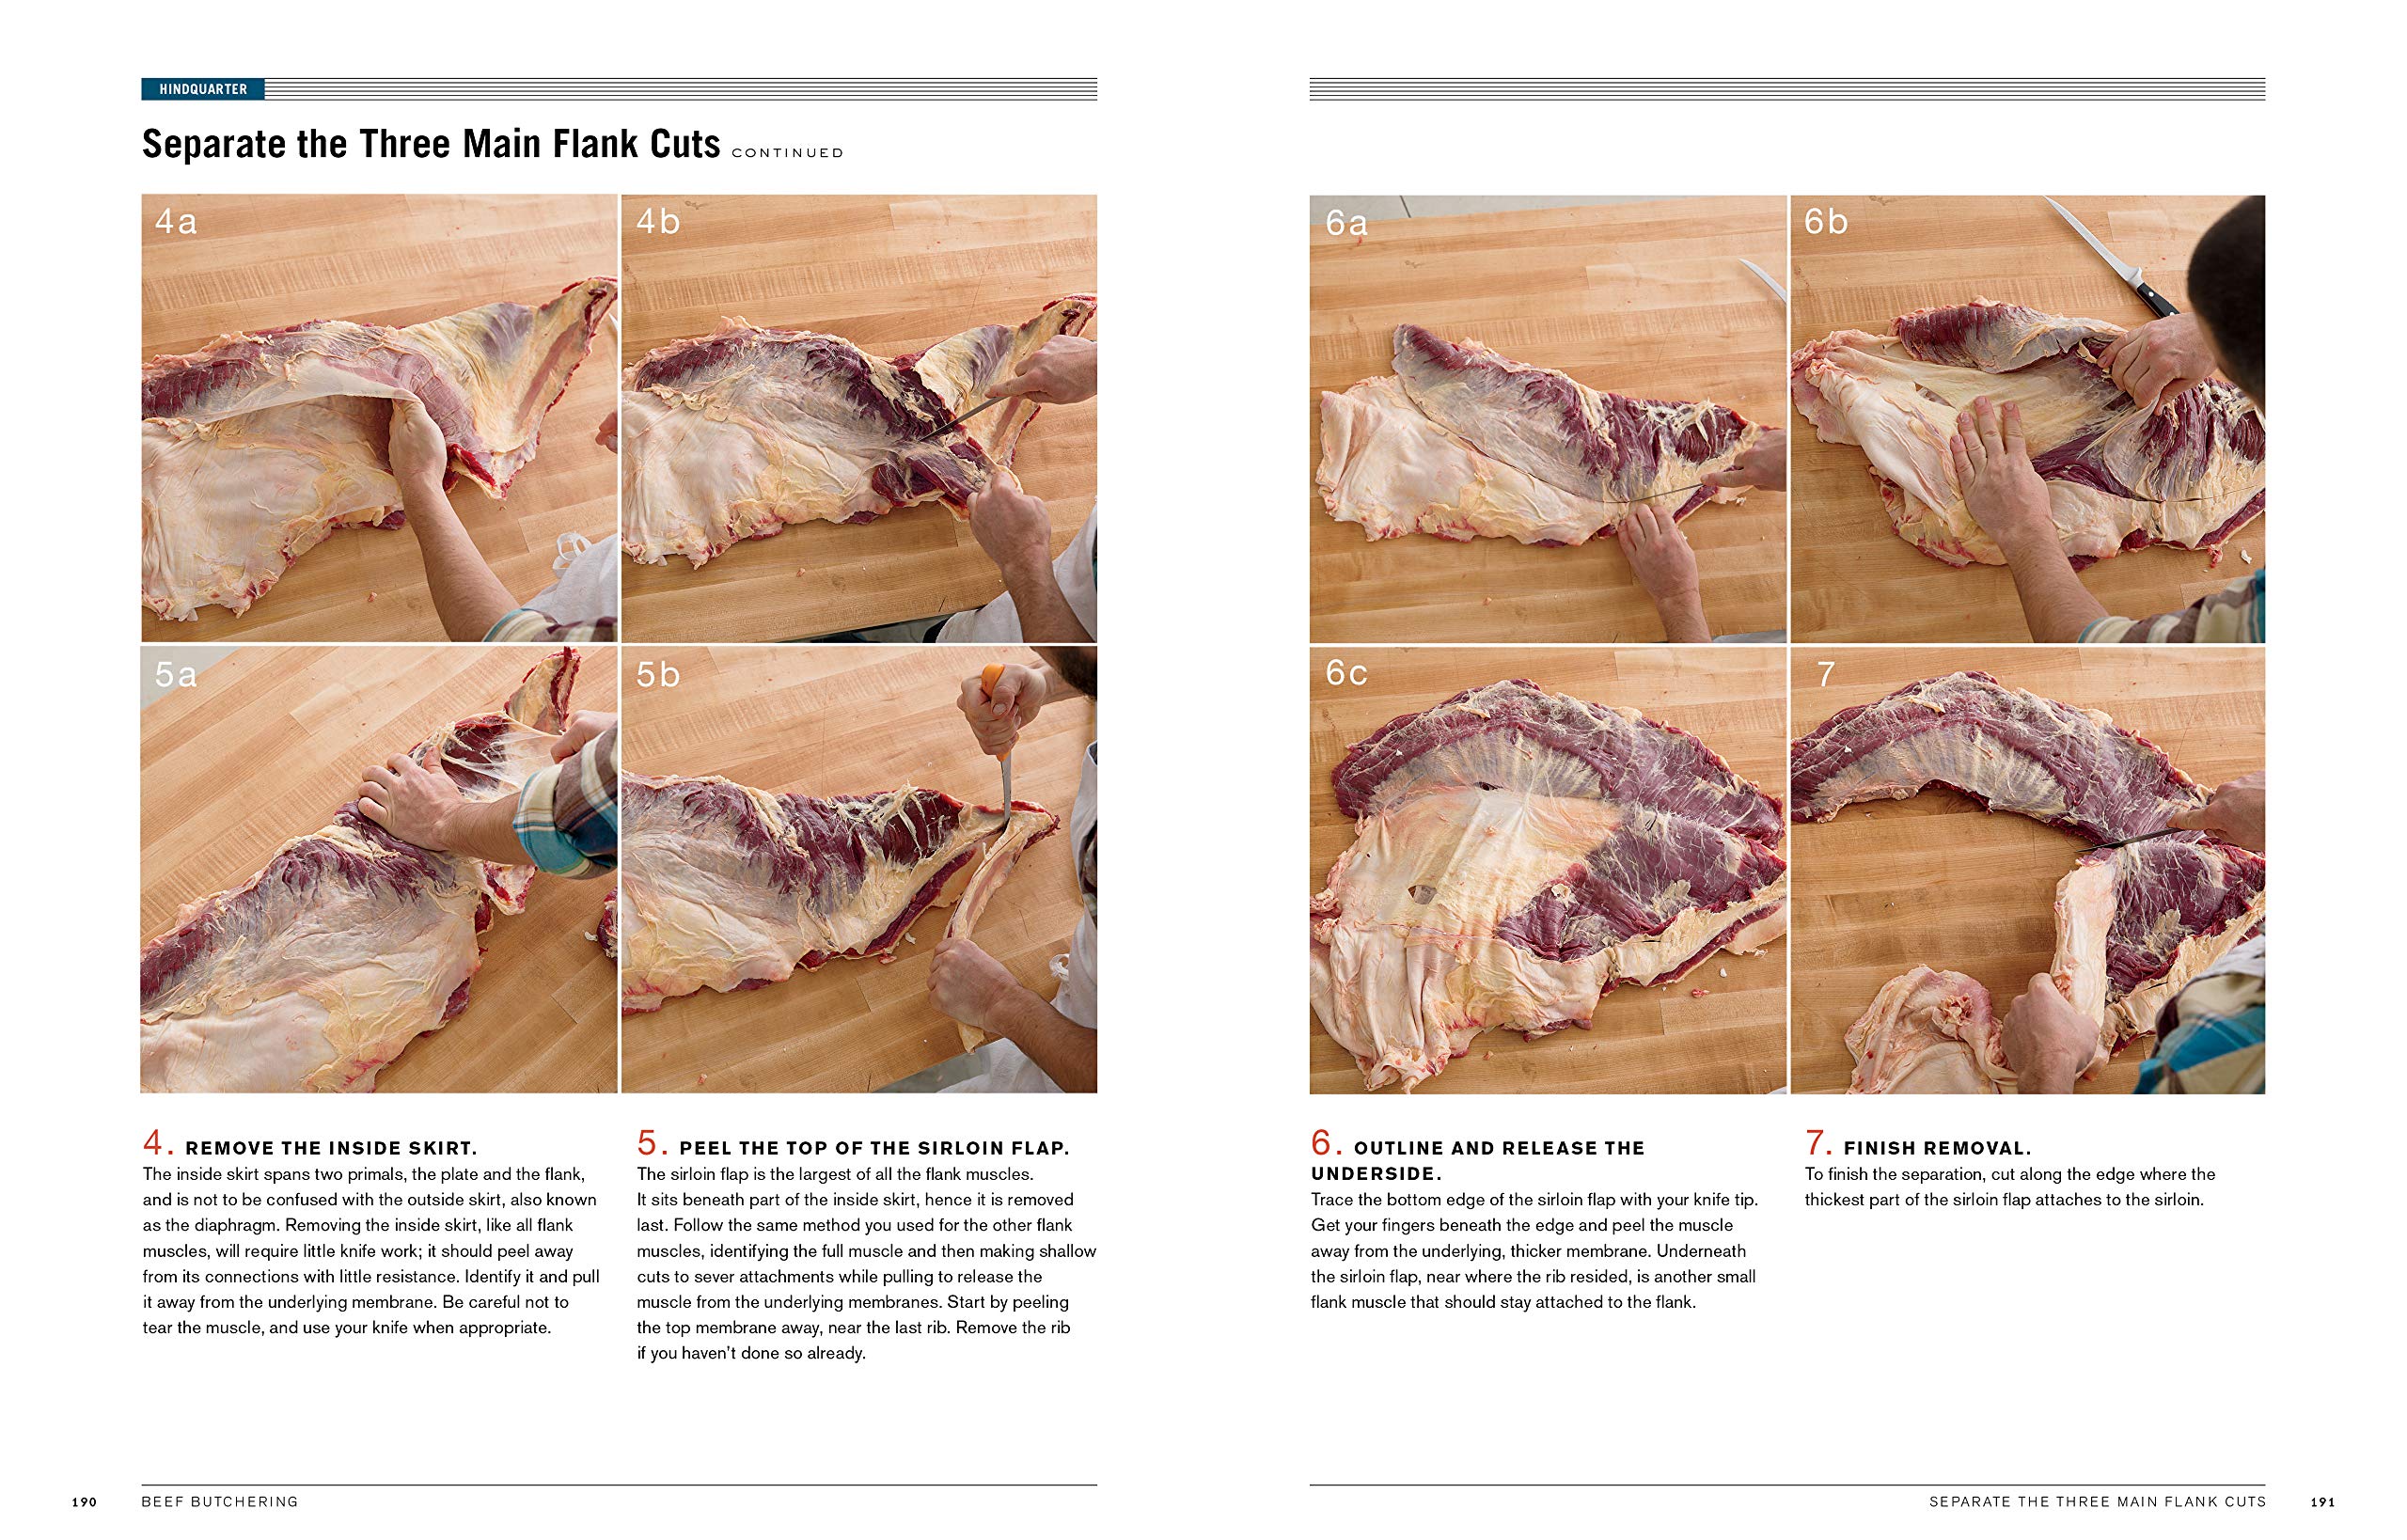 Butchering Beef: The Comprehensive Photographic Guide to Humane Slaughtering and Butchering (Adam Danforth)